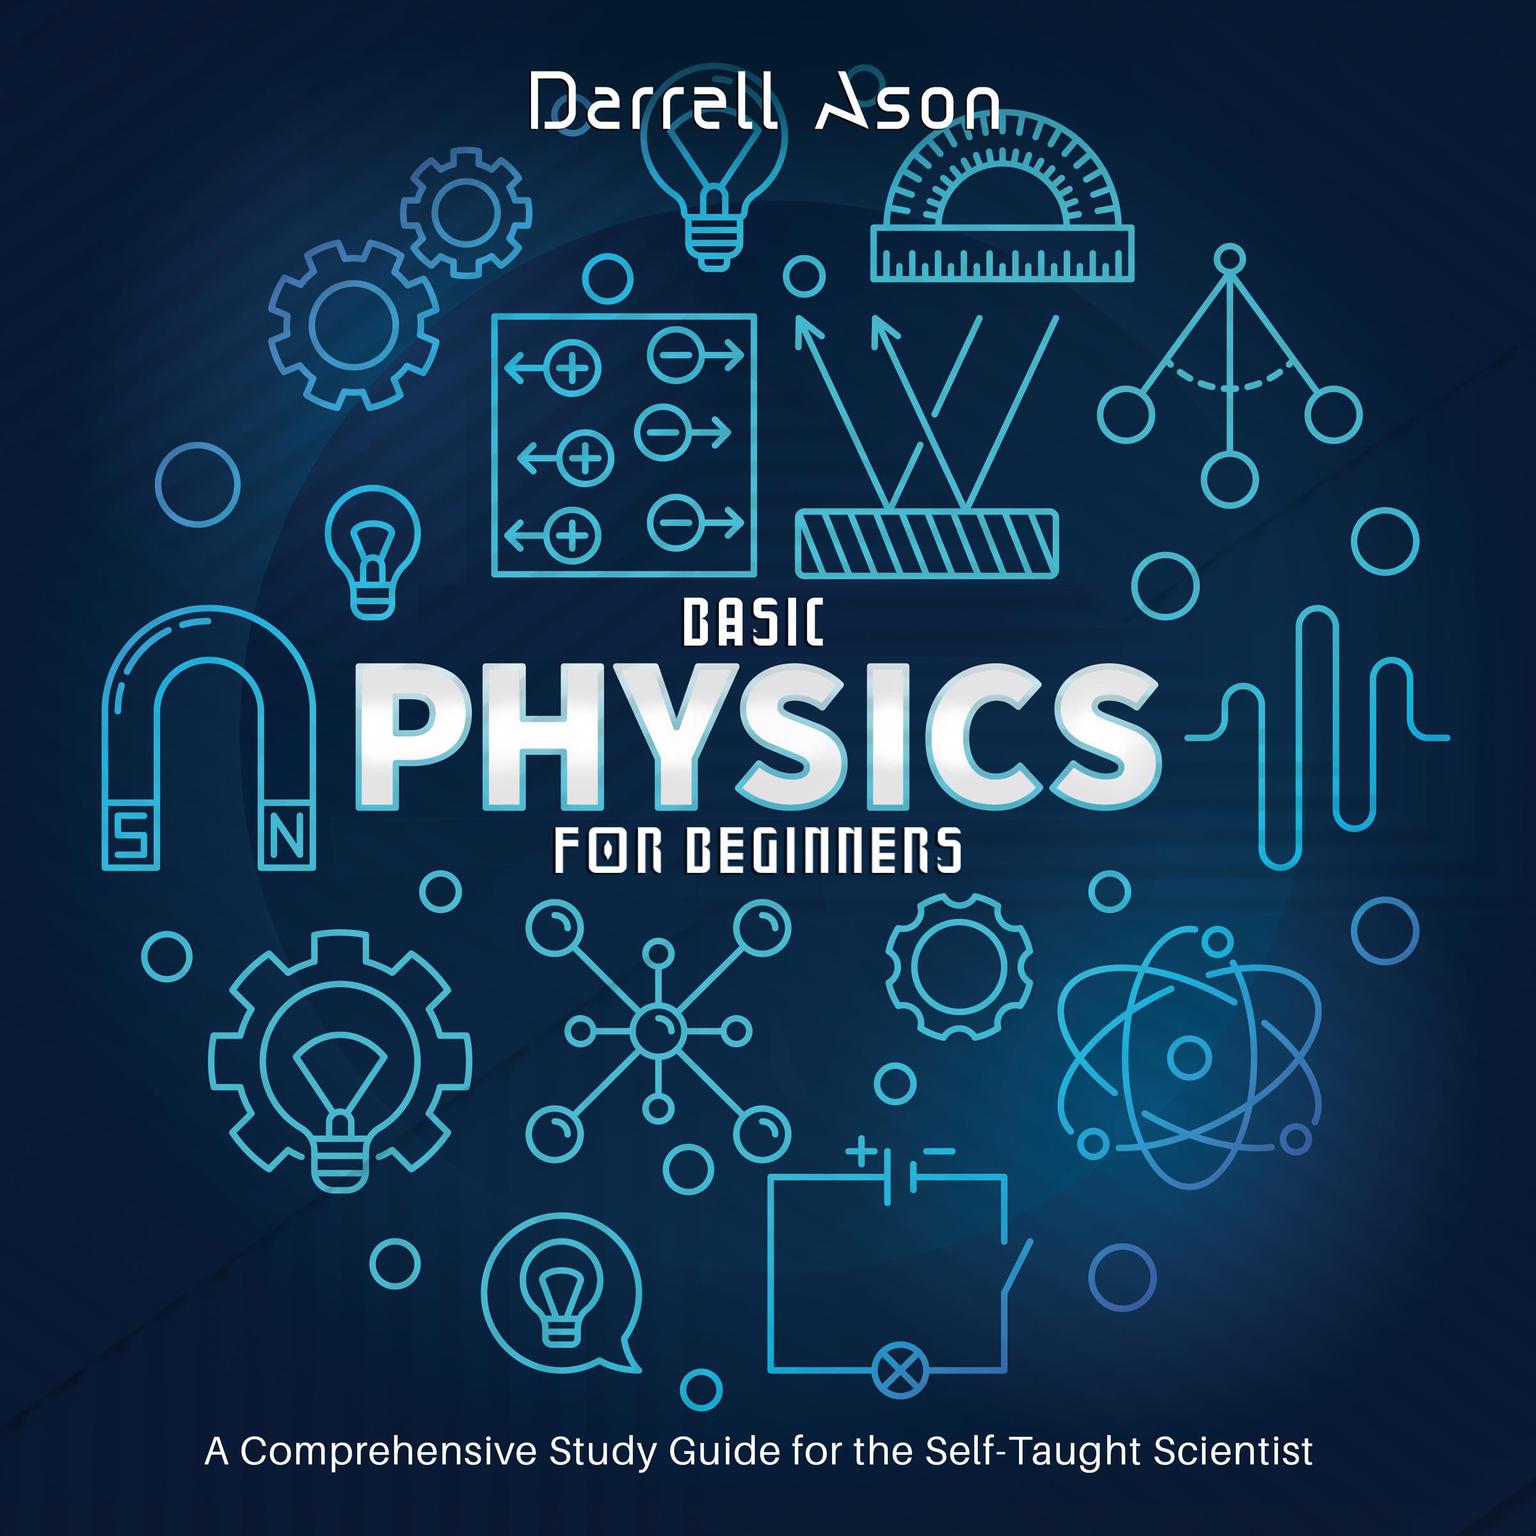 Basic Physics for Beginners: A Comprehensive Study Guide for the Self-Taught Scientist Audiobook, by Darrell Ason